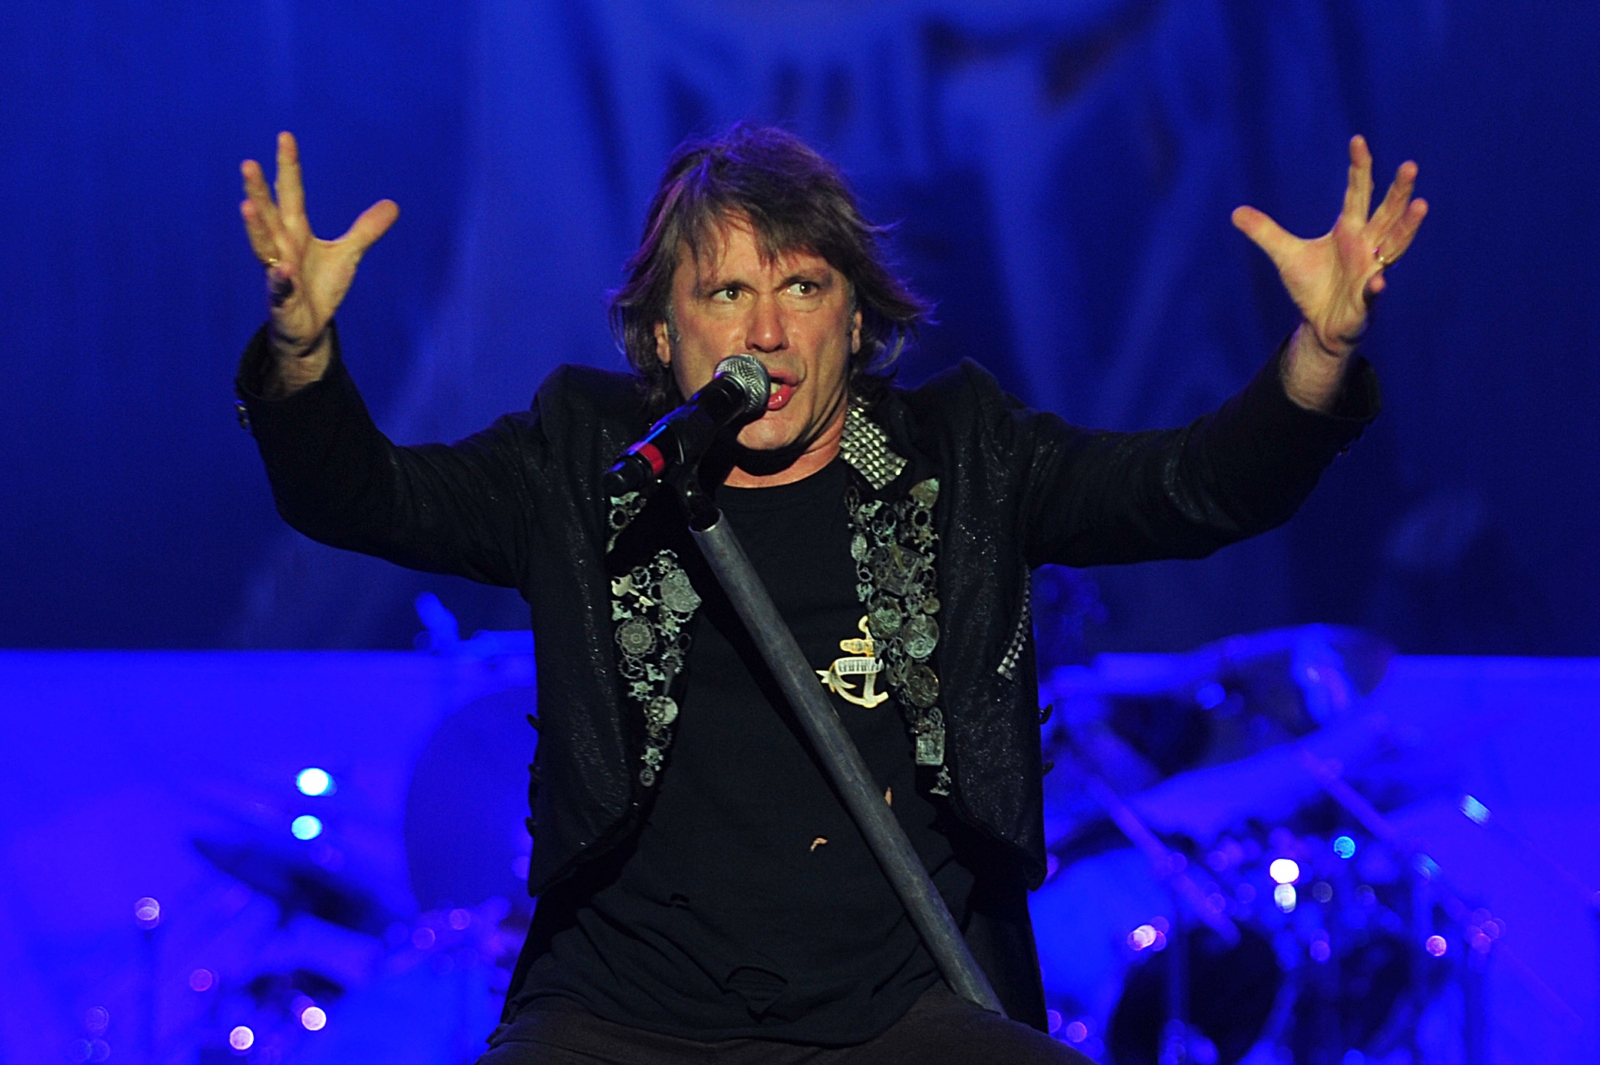 Iron Maiden singer Bruce Dickinson diagnosed with cancer | IBTimes UK